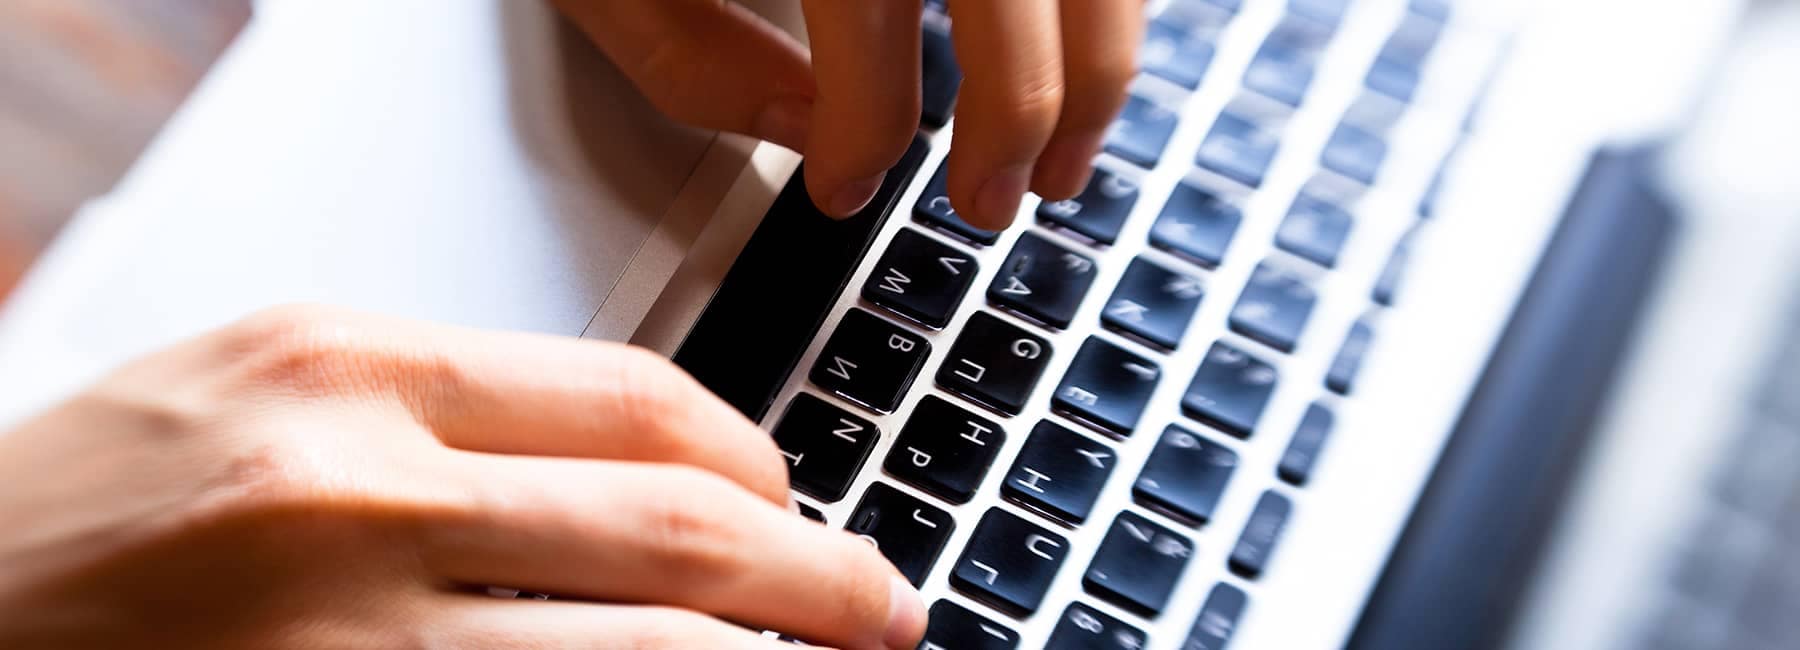 A closeup image of a person typing on a laptop keyboard